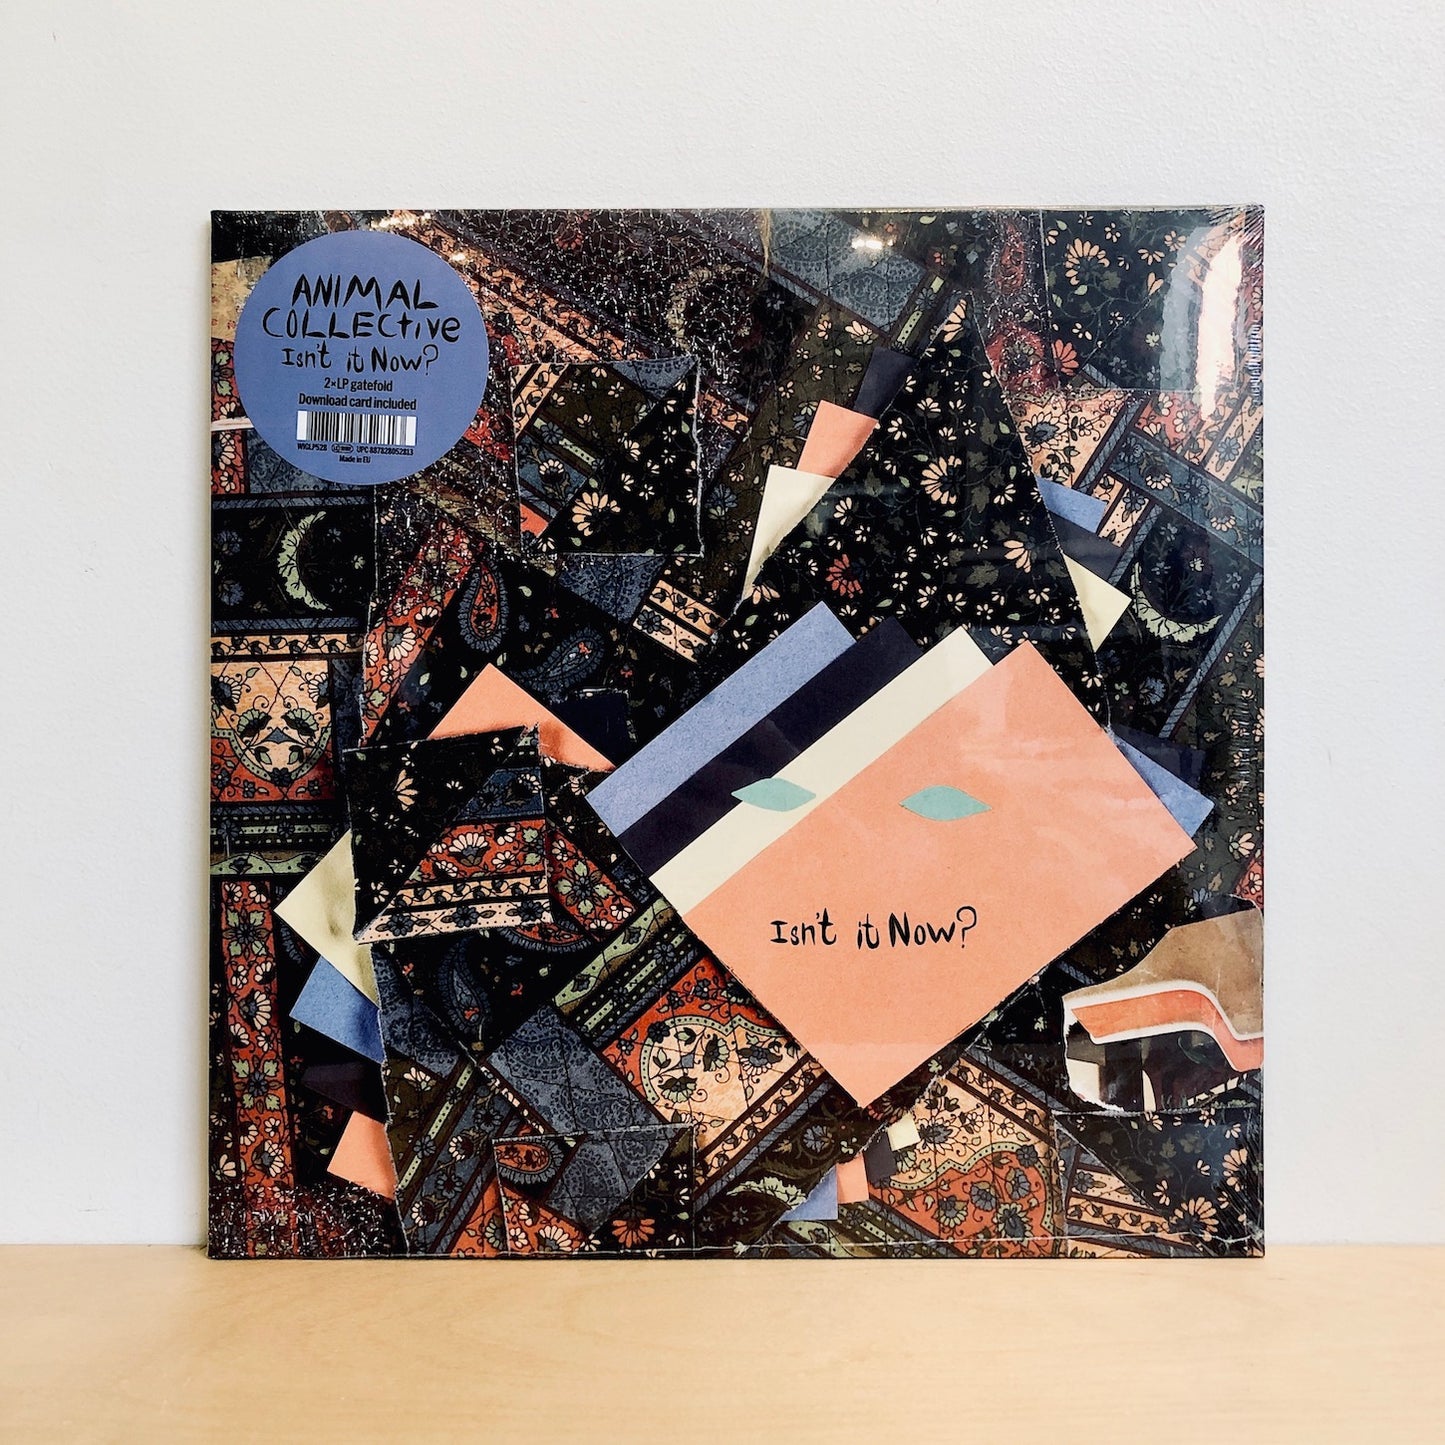 Animal Collective - Isn't It Now?. 2LP